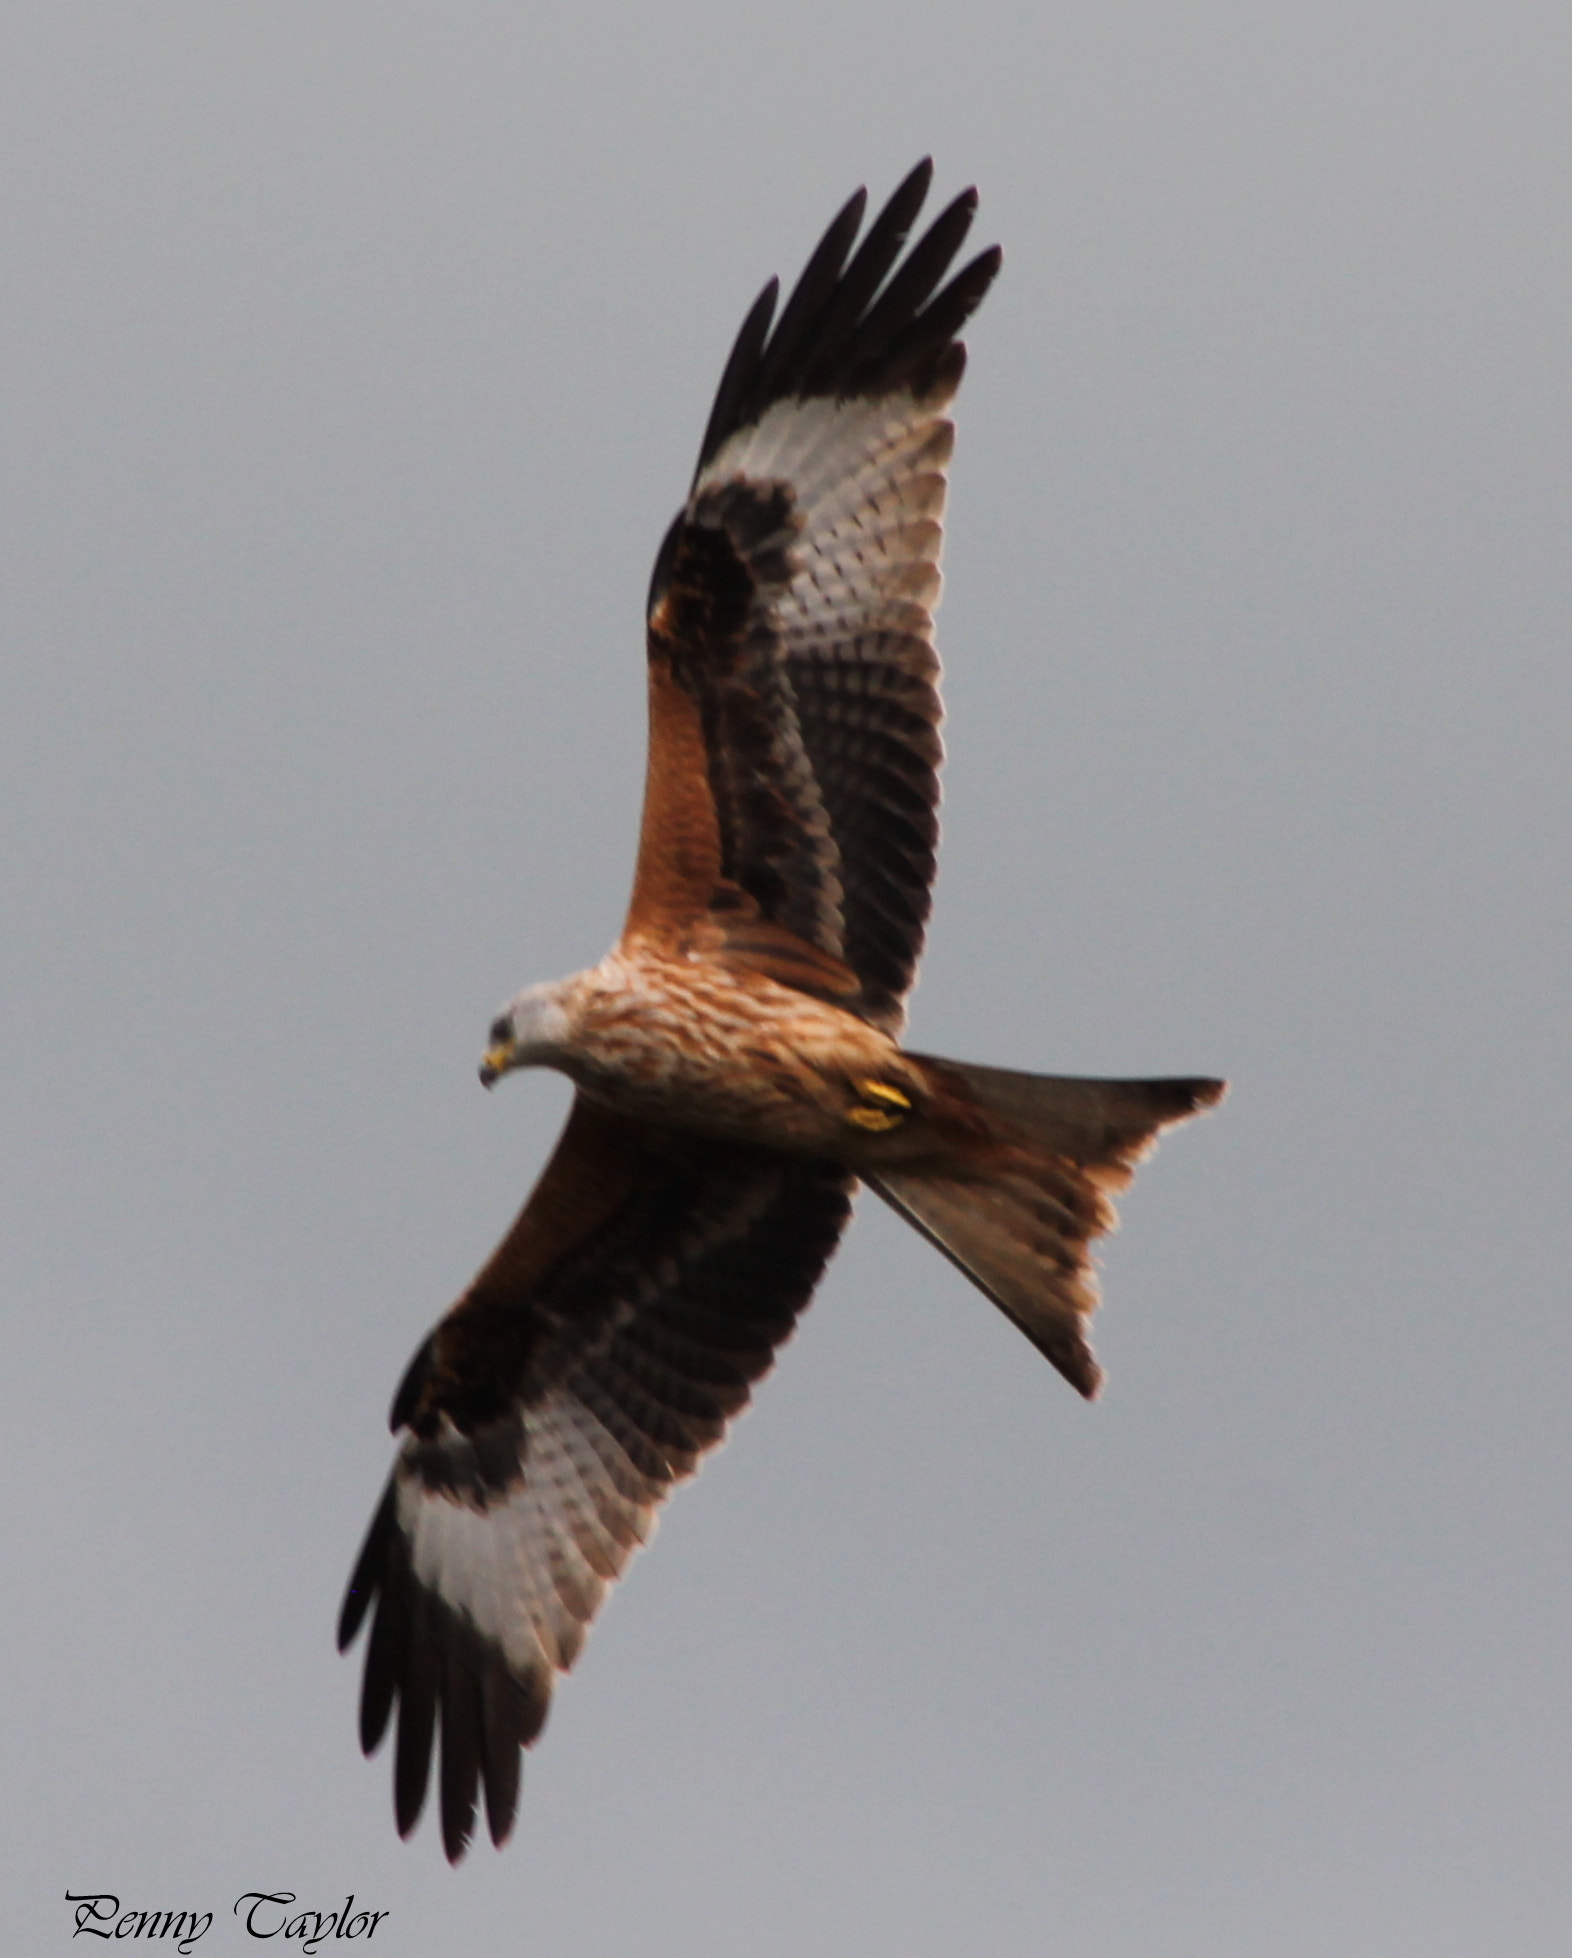 EF75-300mm f/4-5.6 sample photo. Red kite photography